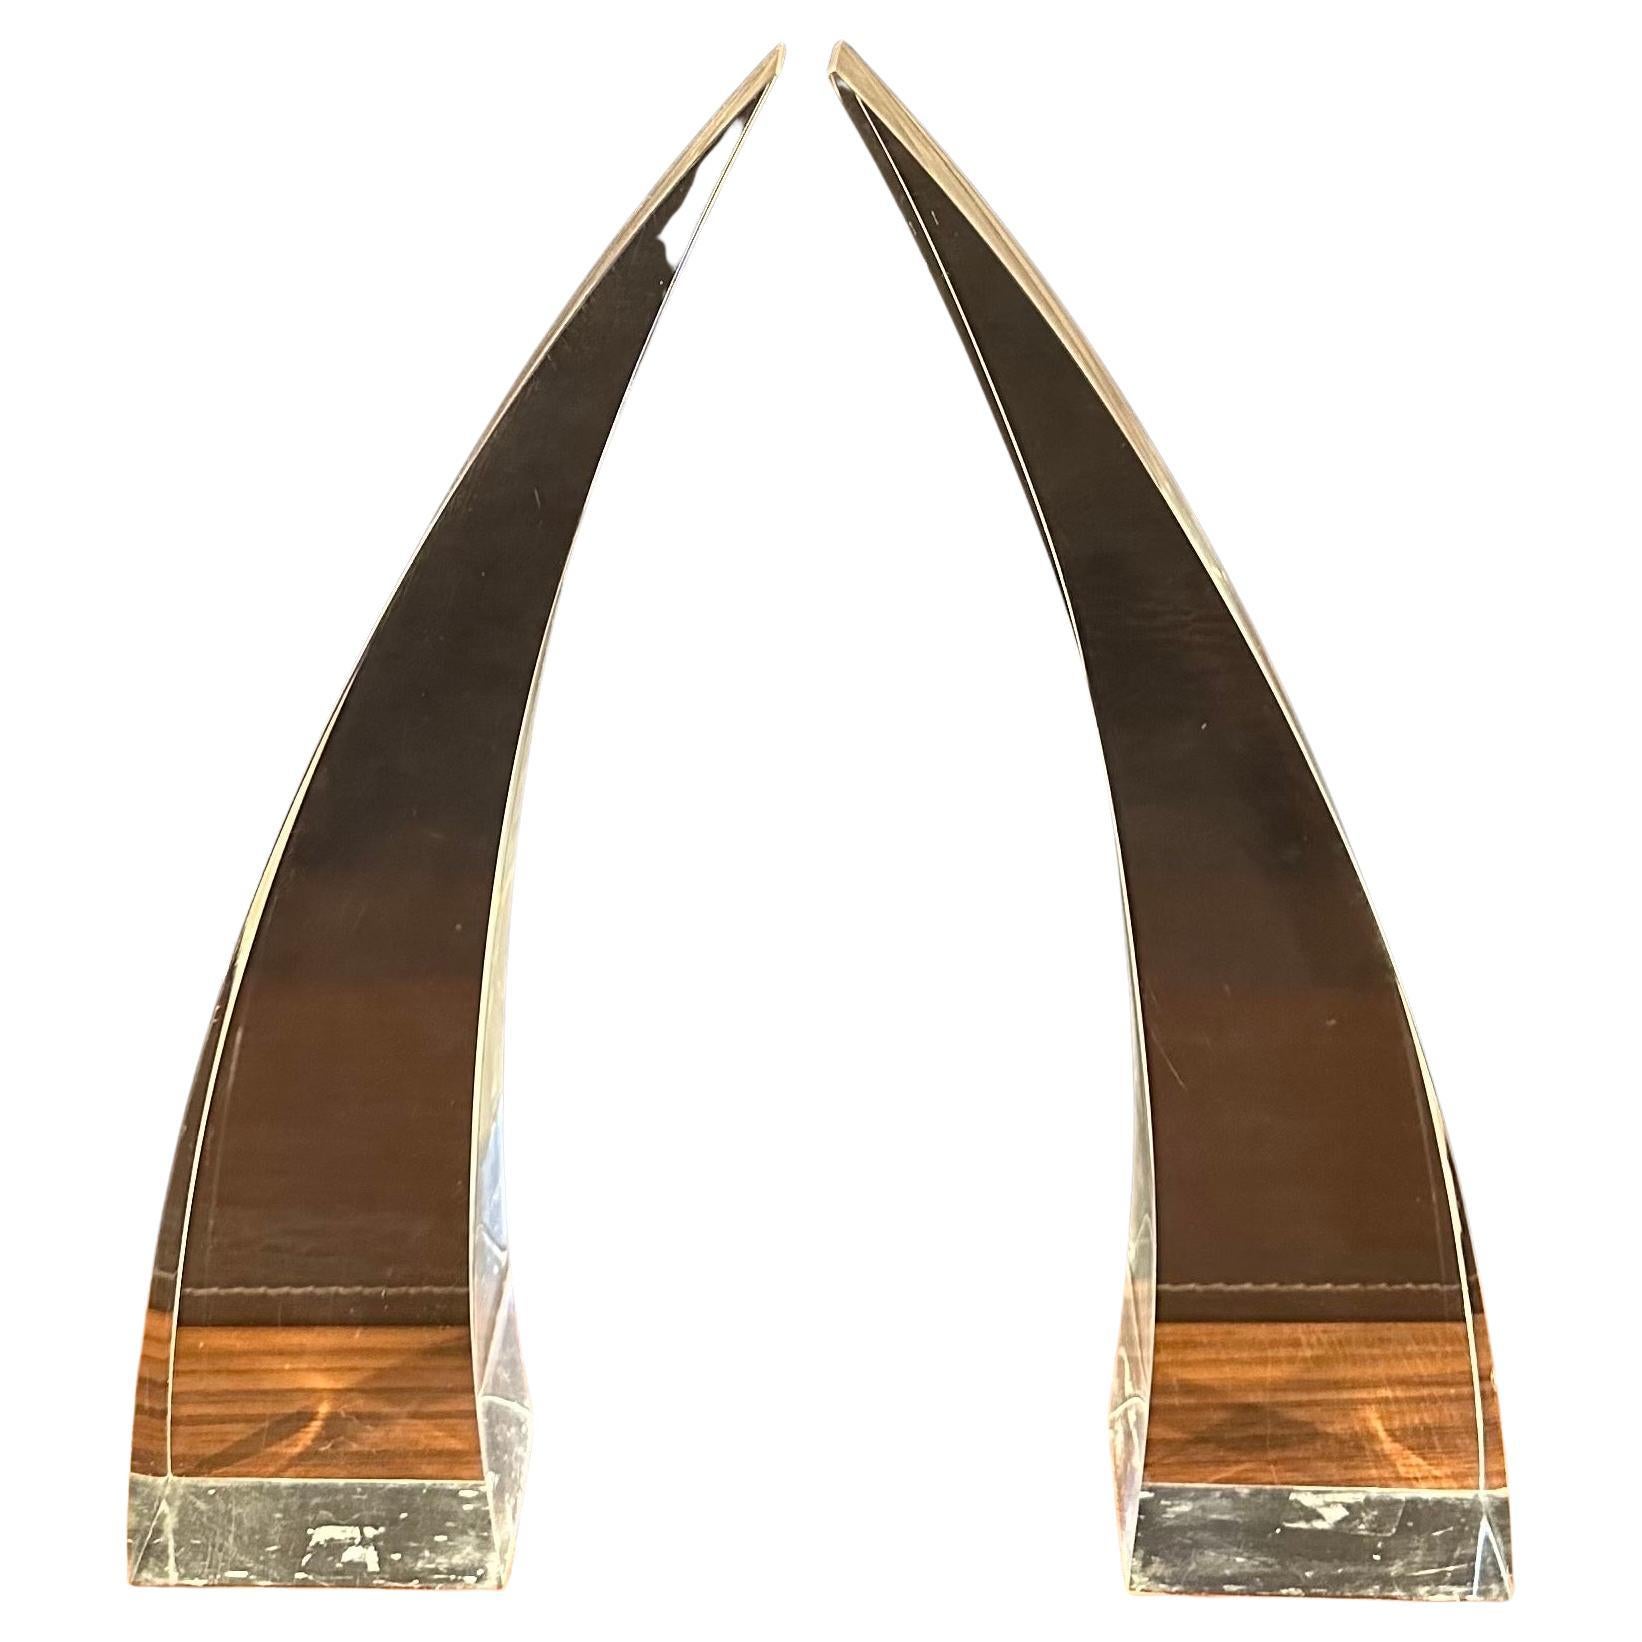 A pair of sculptural modern lucite horns, circa 1970s.  The set is in good vintage condition and measures 11.5